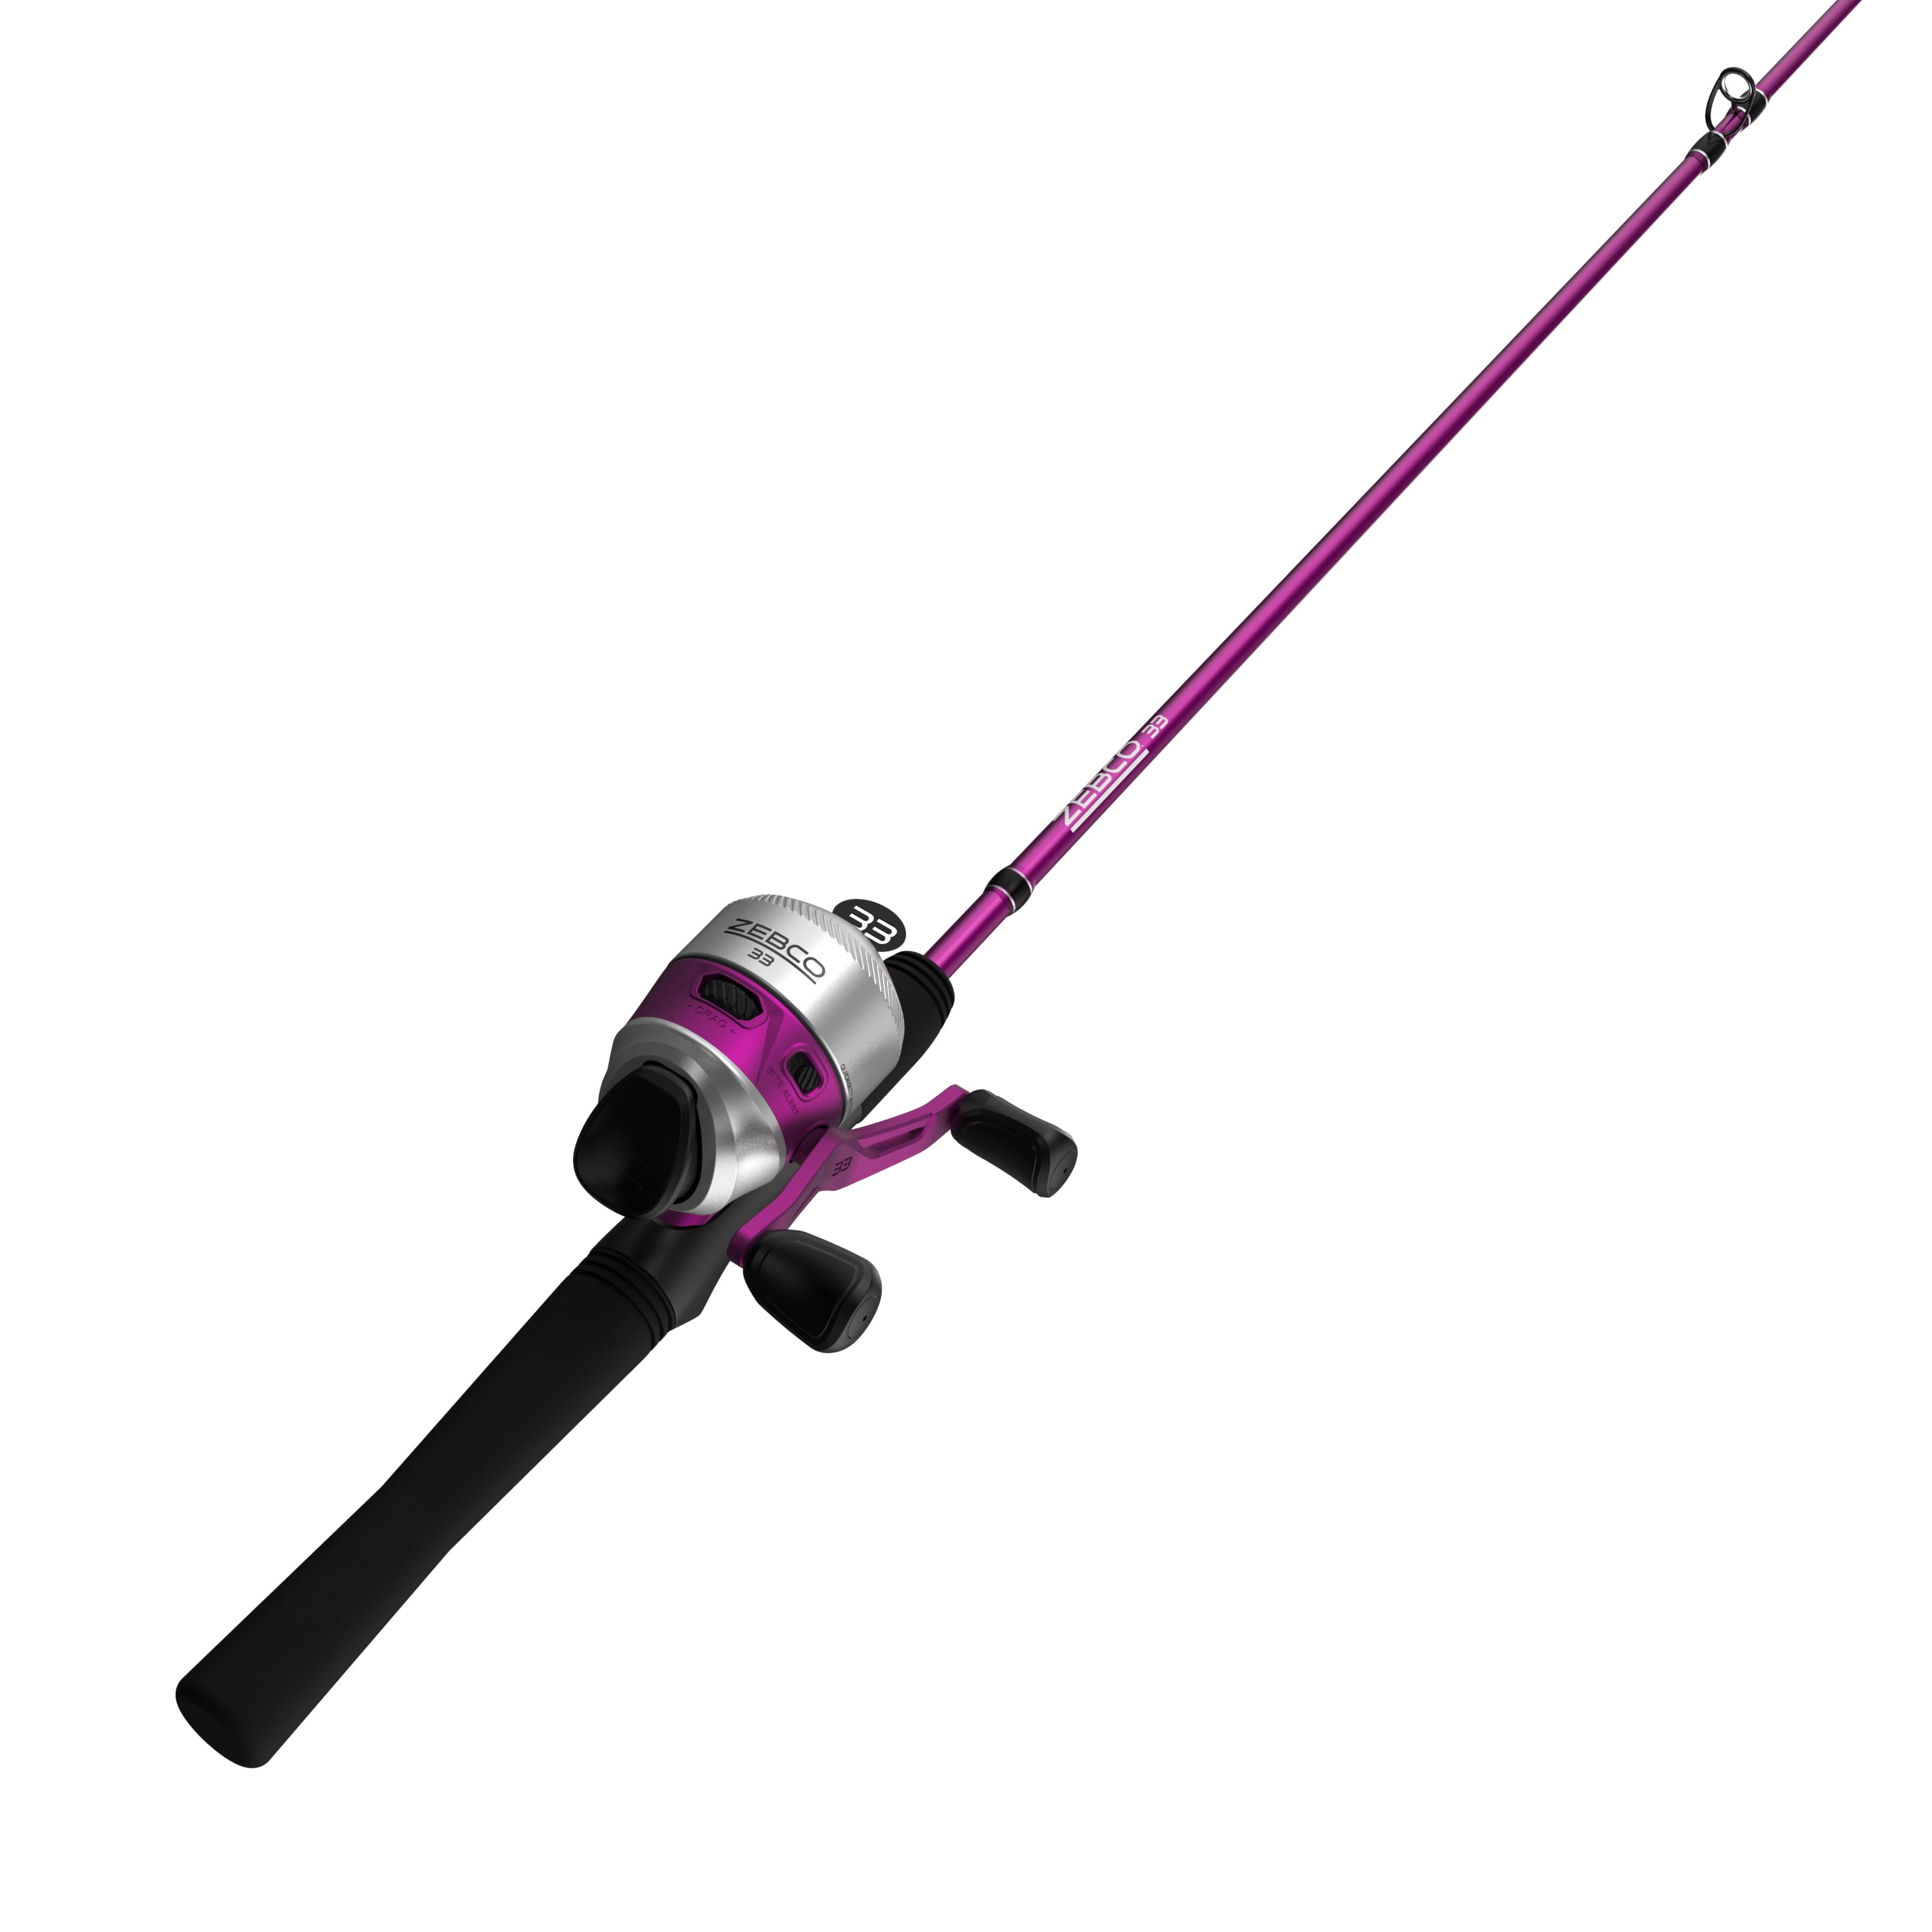 Zebco 33 Spincast Reel and Fishing Rod Combo, 6-Foot 2-Piece Durable  Fiberglass Fishing Pole, QuickSet Anti-Reverse Fishing Reel with Bite  Alert, Pink 